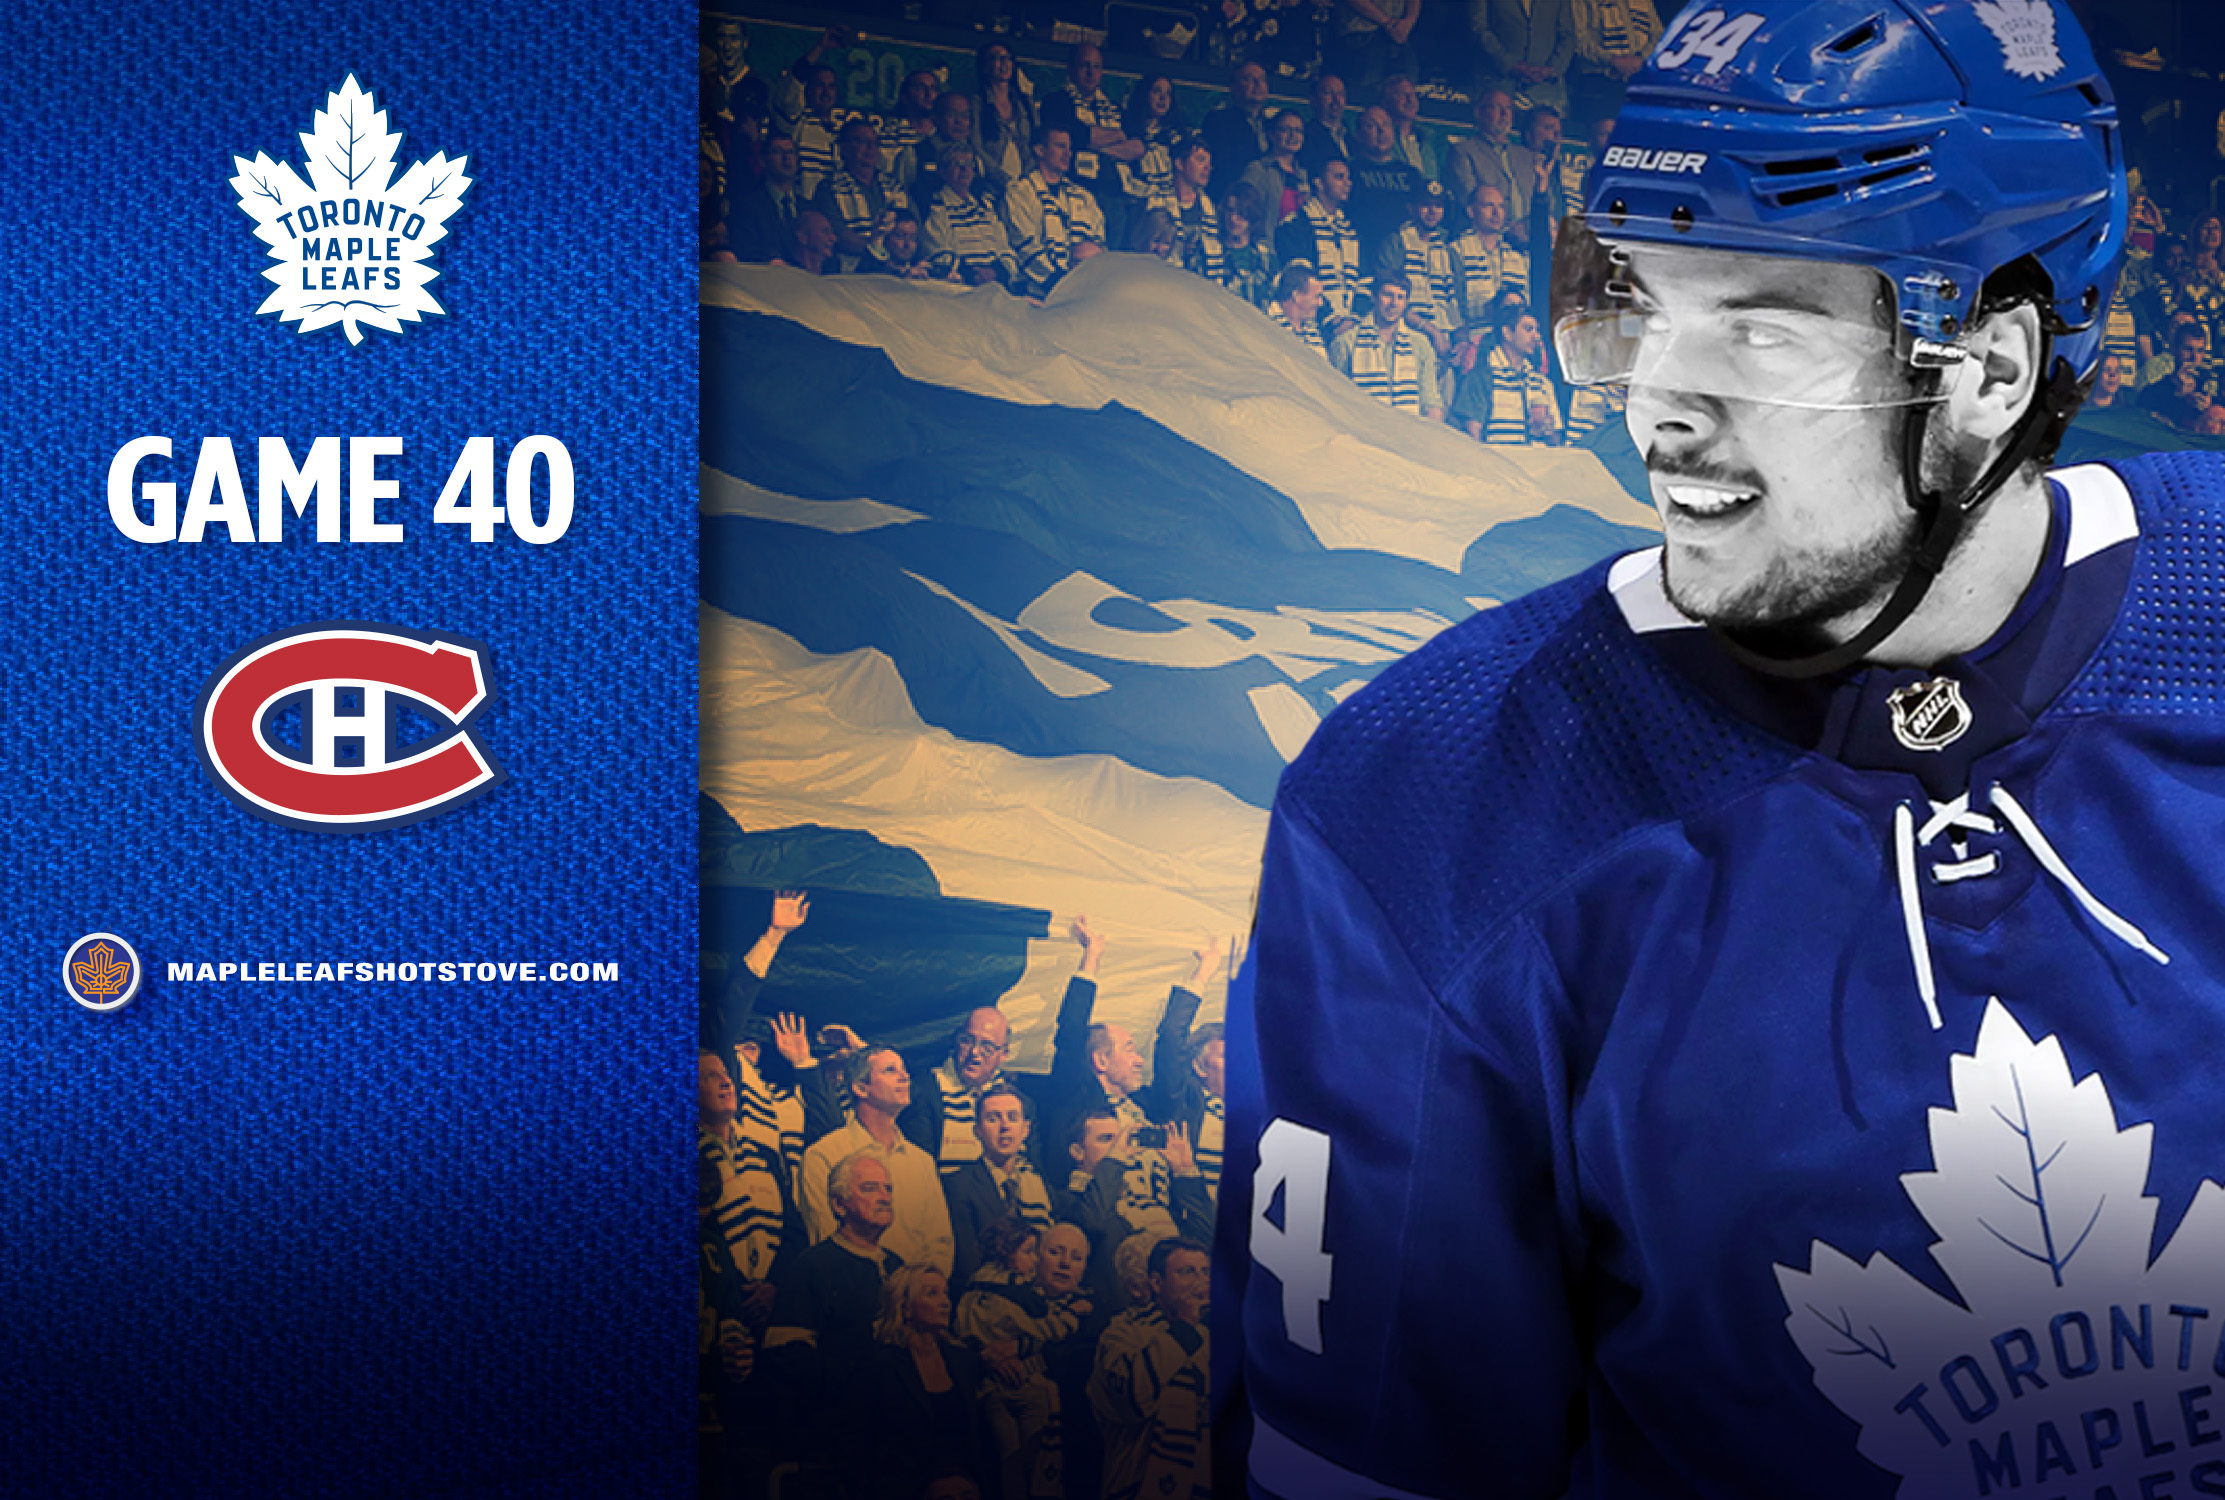 Toronto Maple Leafs vs. Montreal Canadiens Game 40 Preview